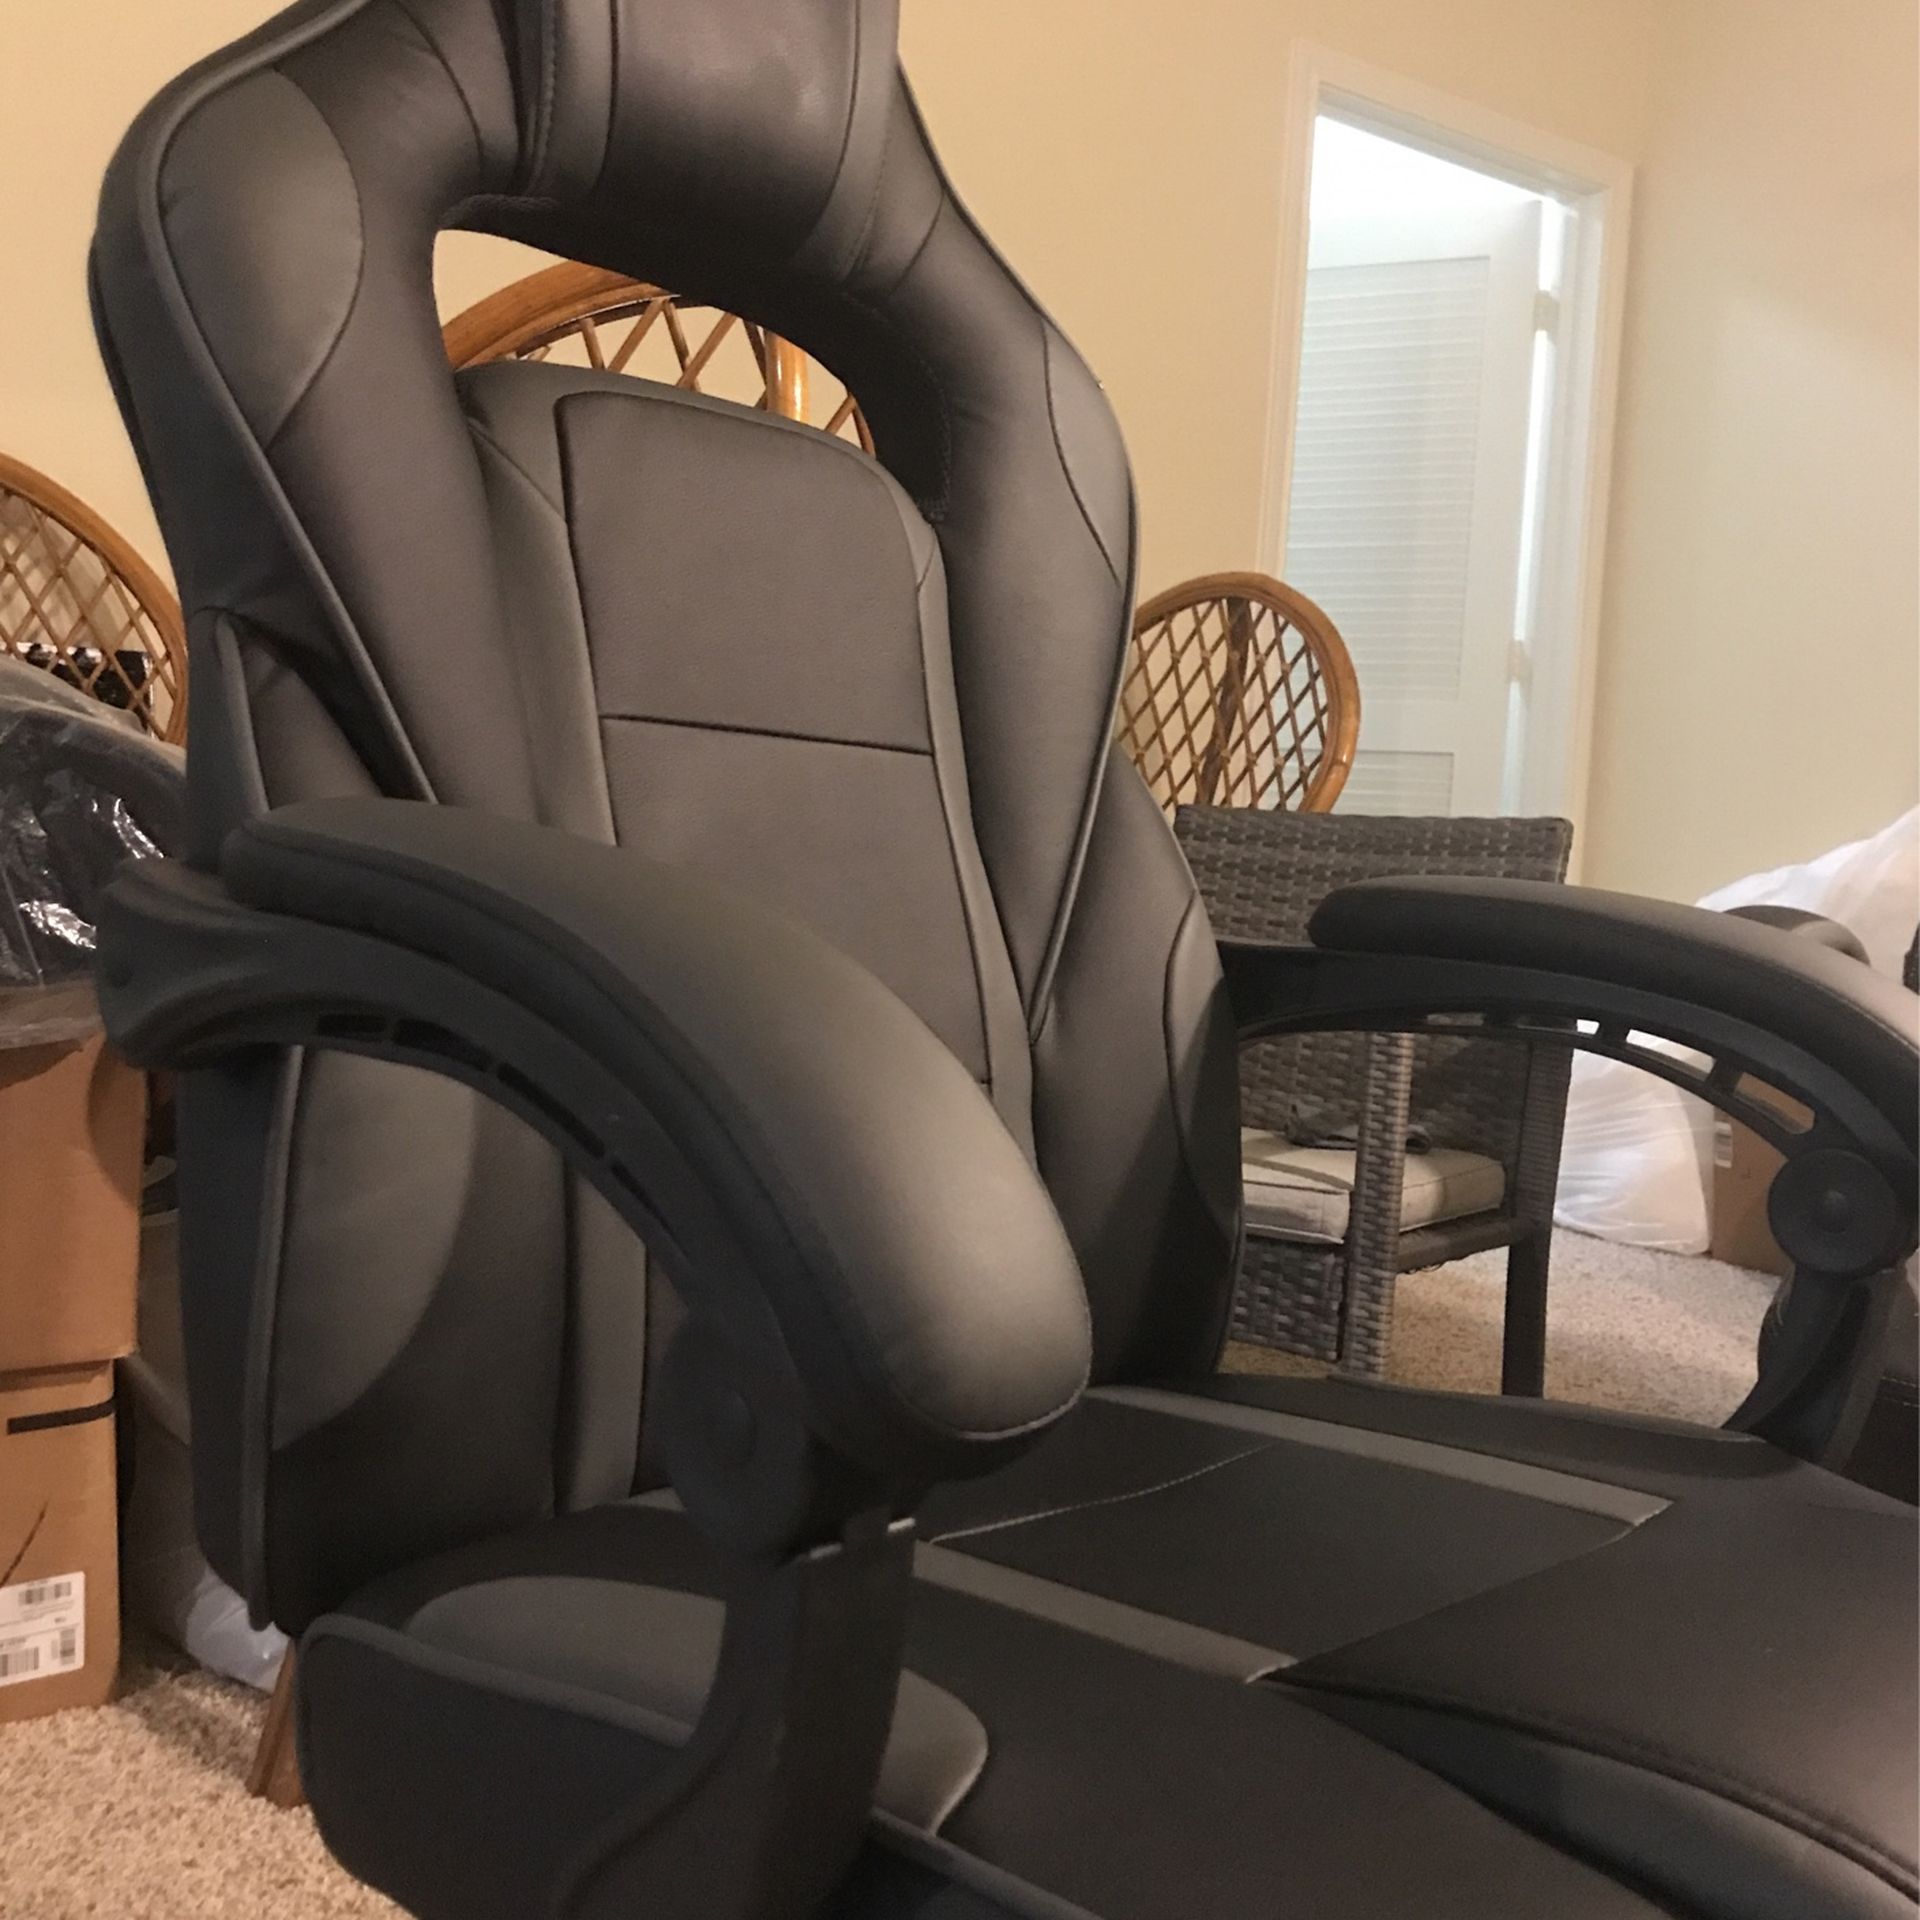 Gaming Chair w/ folding leg rest feature - clean 